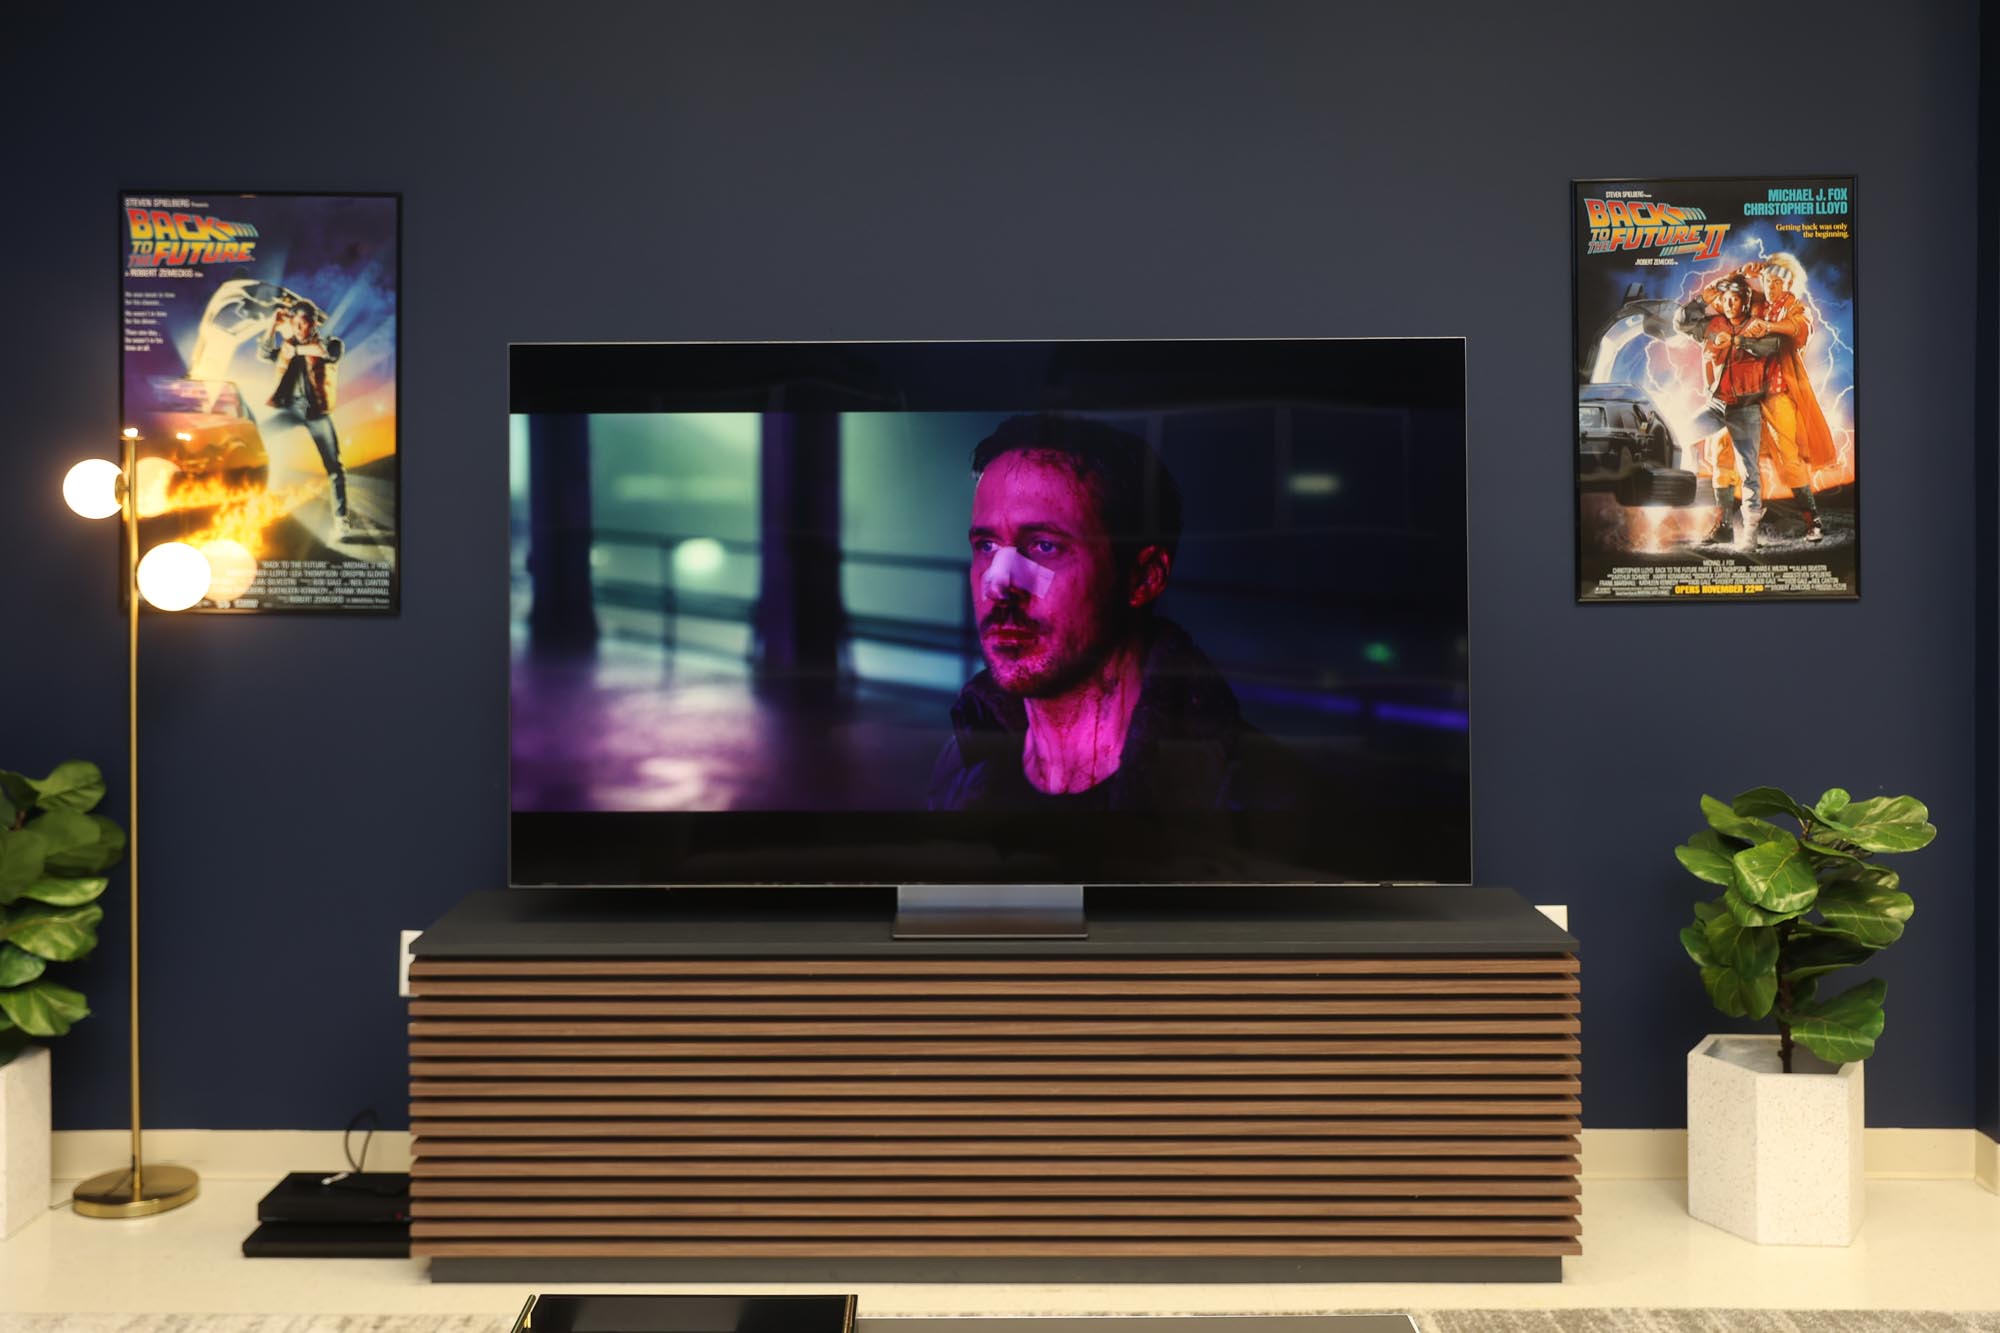 If you buy a 2024 Samsung TV, you get another 65-inch 4K TV completely free while they last